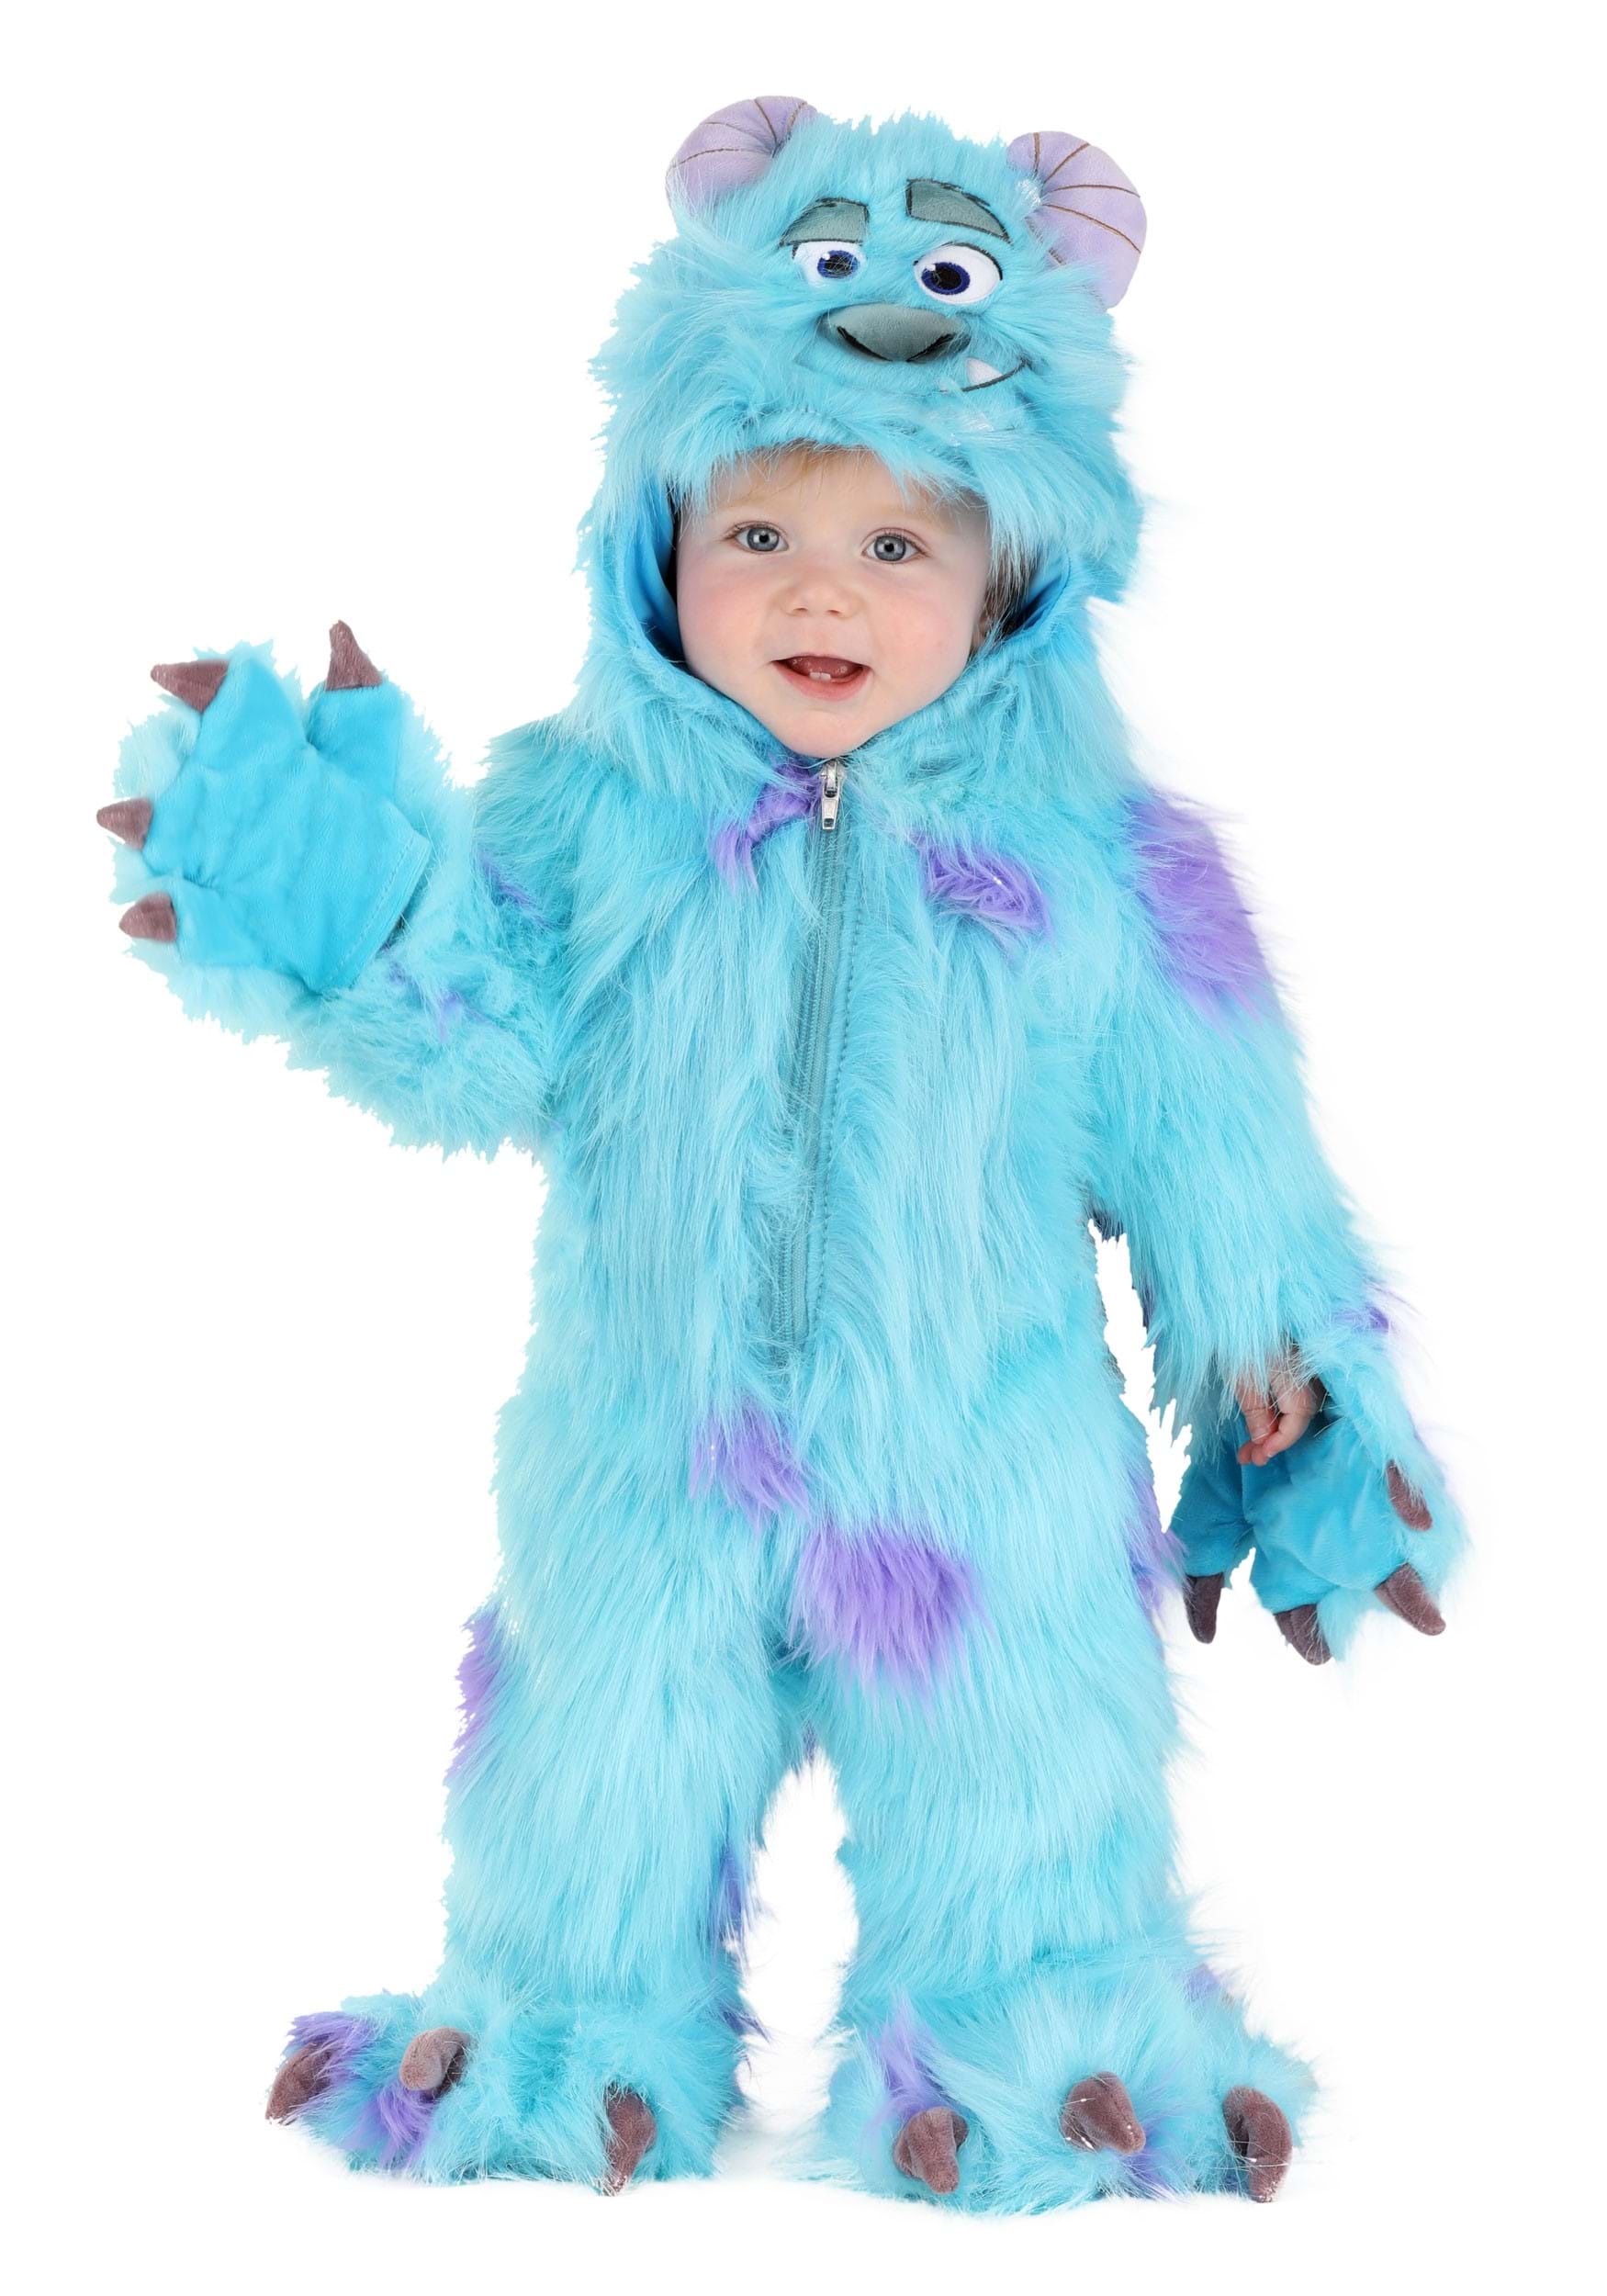 Photos - Fancy Dress Disney FUN Costumes Hooded Infant Sulley Monsters Inc Costume Purple/Brown 